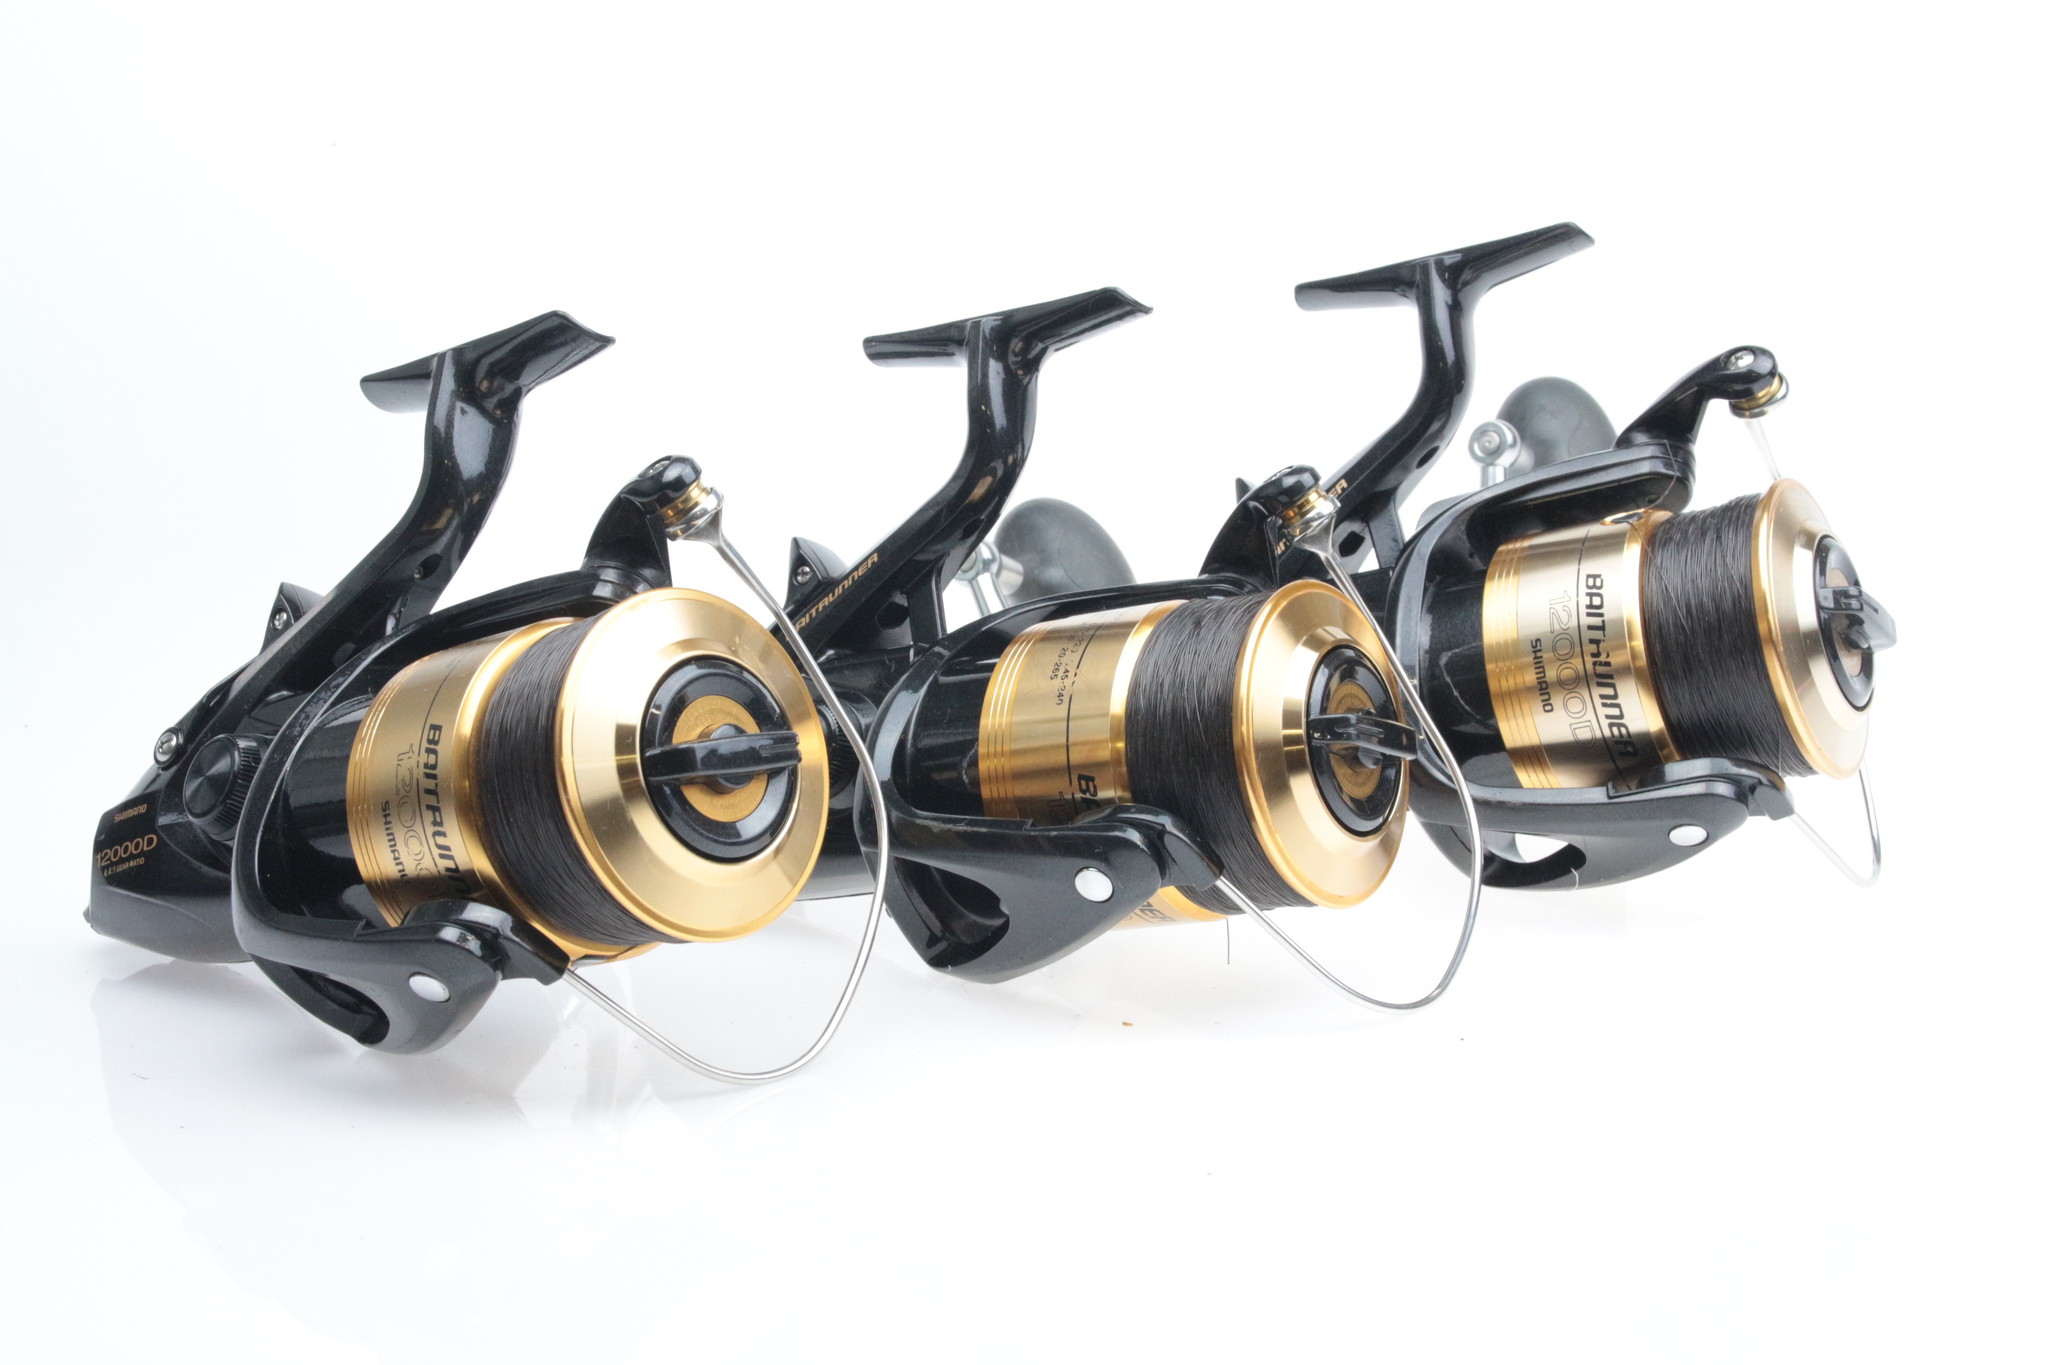 NOW up to 50% discount on new and second-hand carp reels! - CV Fishing